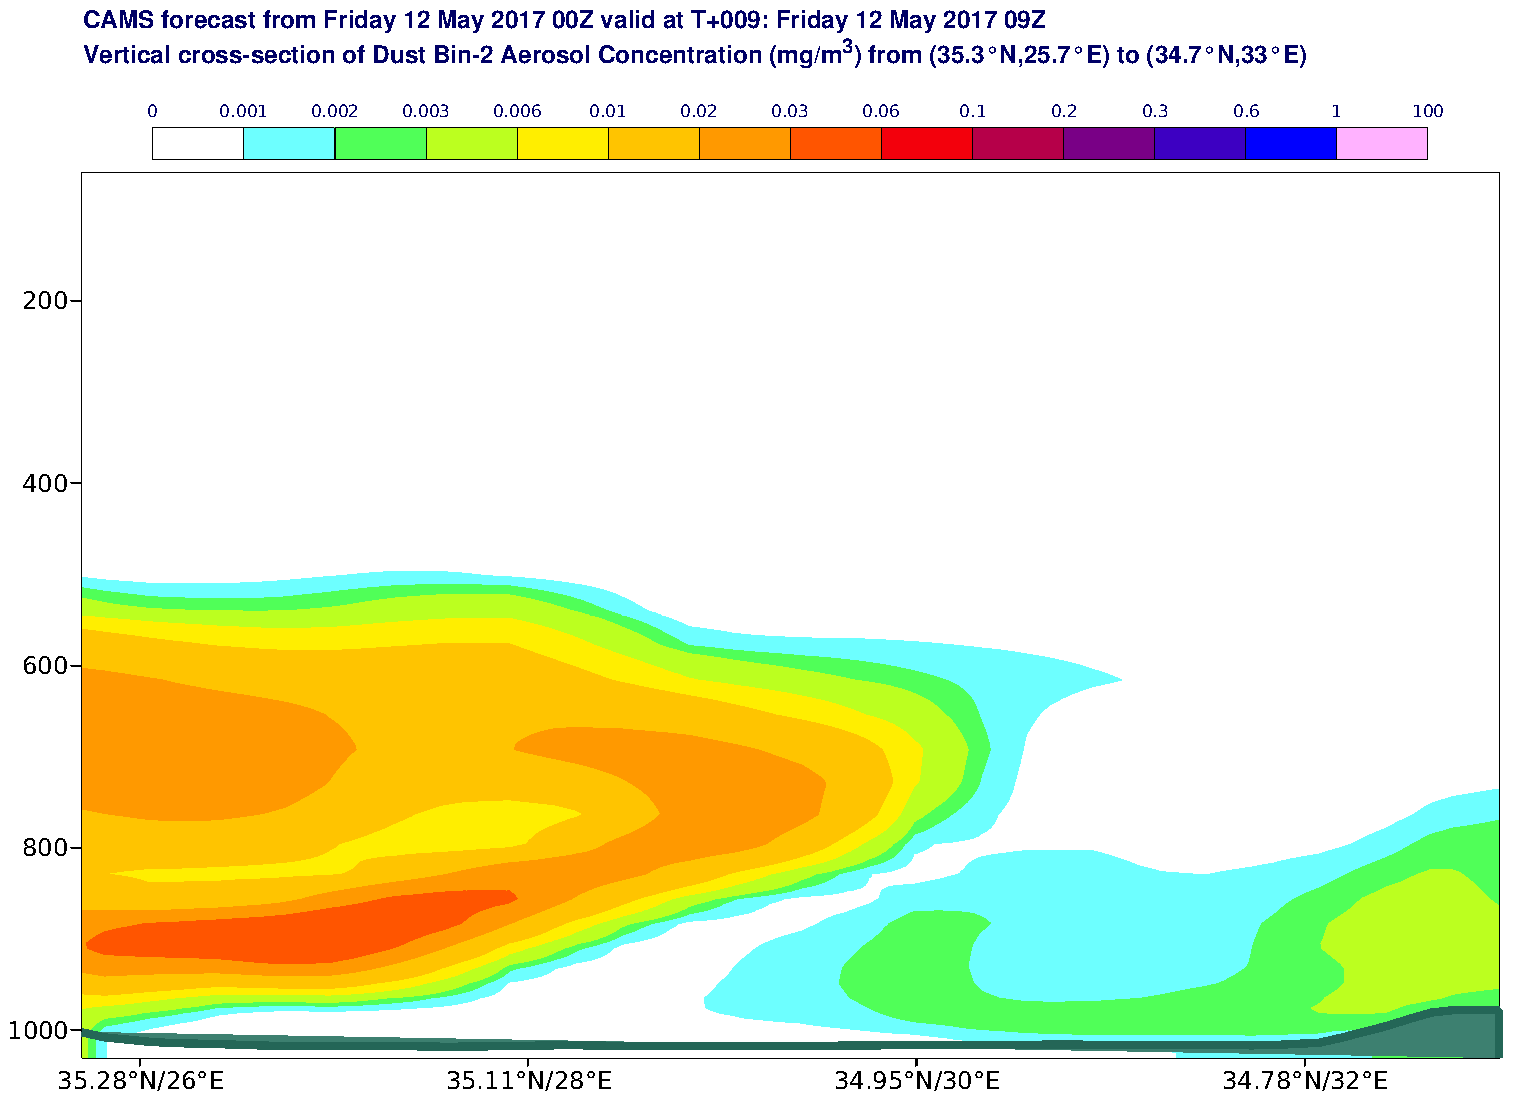 Vertical cross-section of Dust Bin-2 Aerosol Concentration (mg/m3) valid at T9 - 2017-05-12 09:00